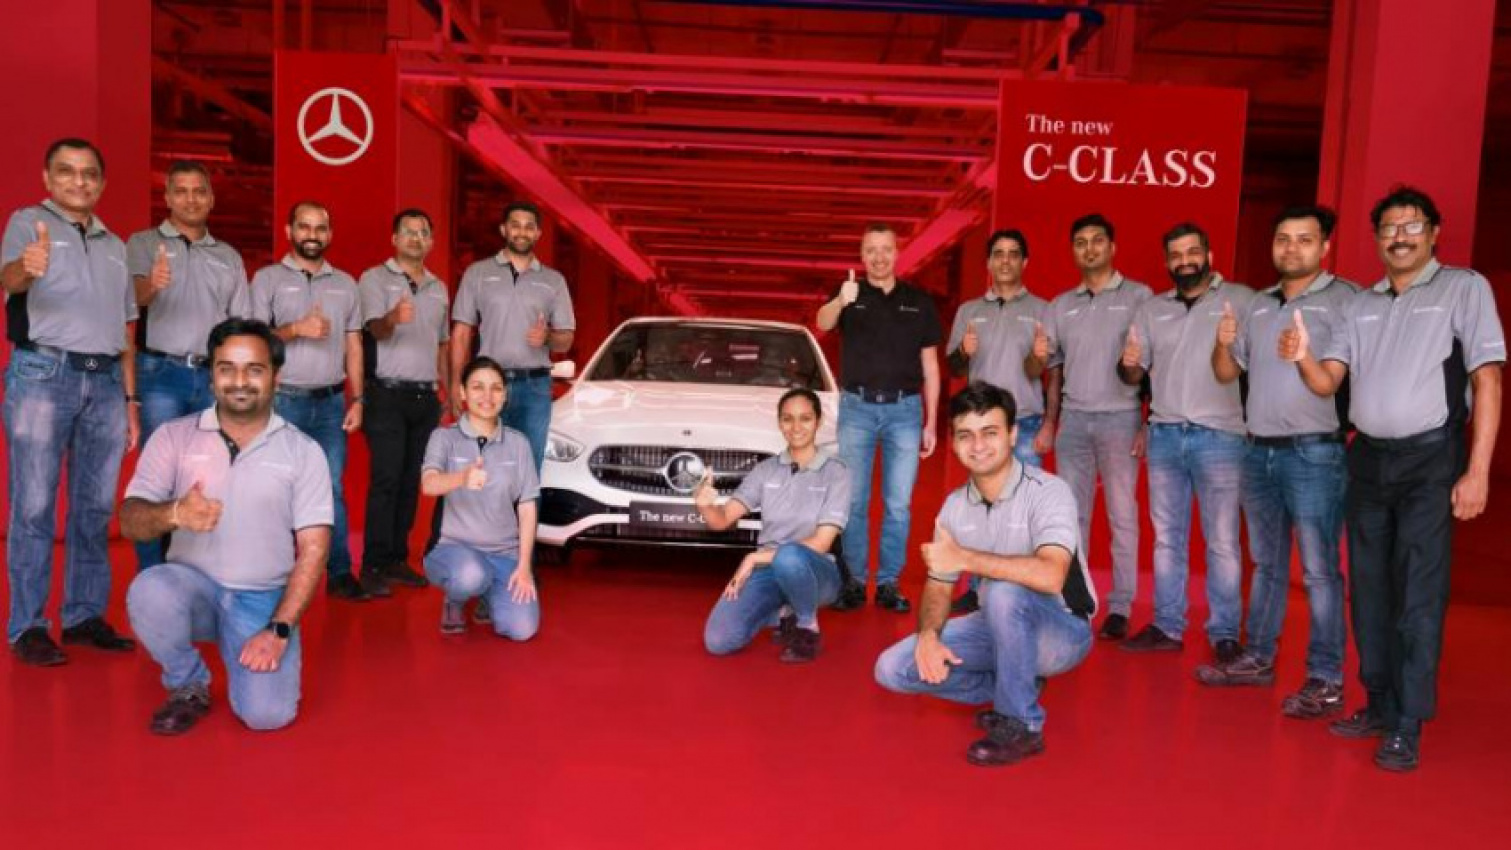 autos, cars, mercedes-benz, 2022 mercedes-benz c-class, 2022 mercedes-benz c-class interior, 2022 mercedes-benz c-class price, 2022 mercedes-benz c-class specifications, 2022 mercedes-benz cars, mercedes, mercedes-benz c-class, overdrive, 2022 mercedes-benz c-class starts rolling out from production facility in chakan ahead of launch on may 10